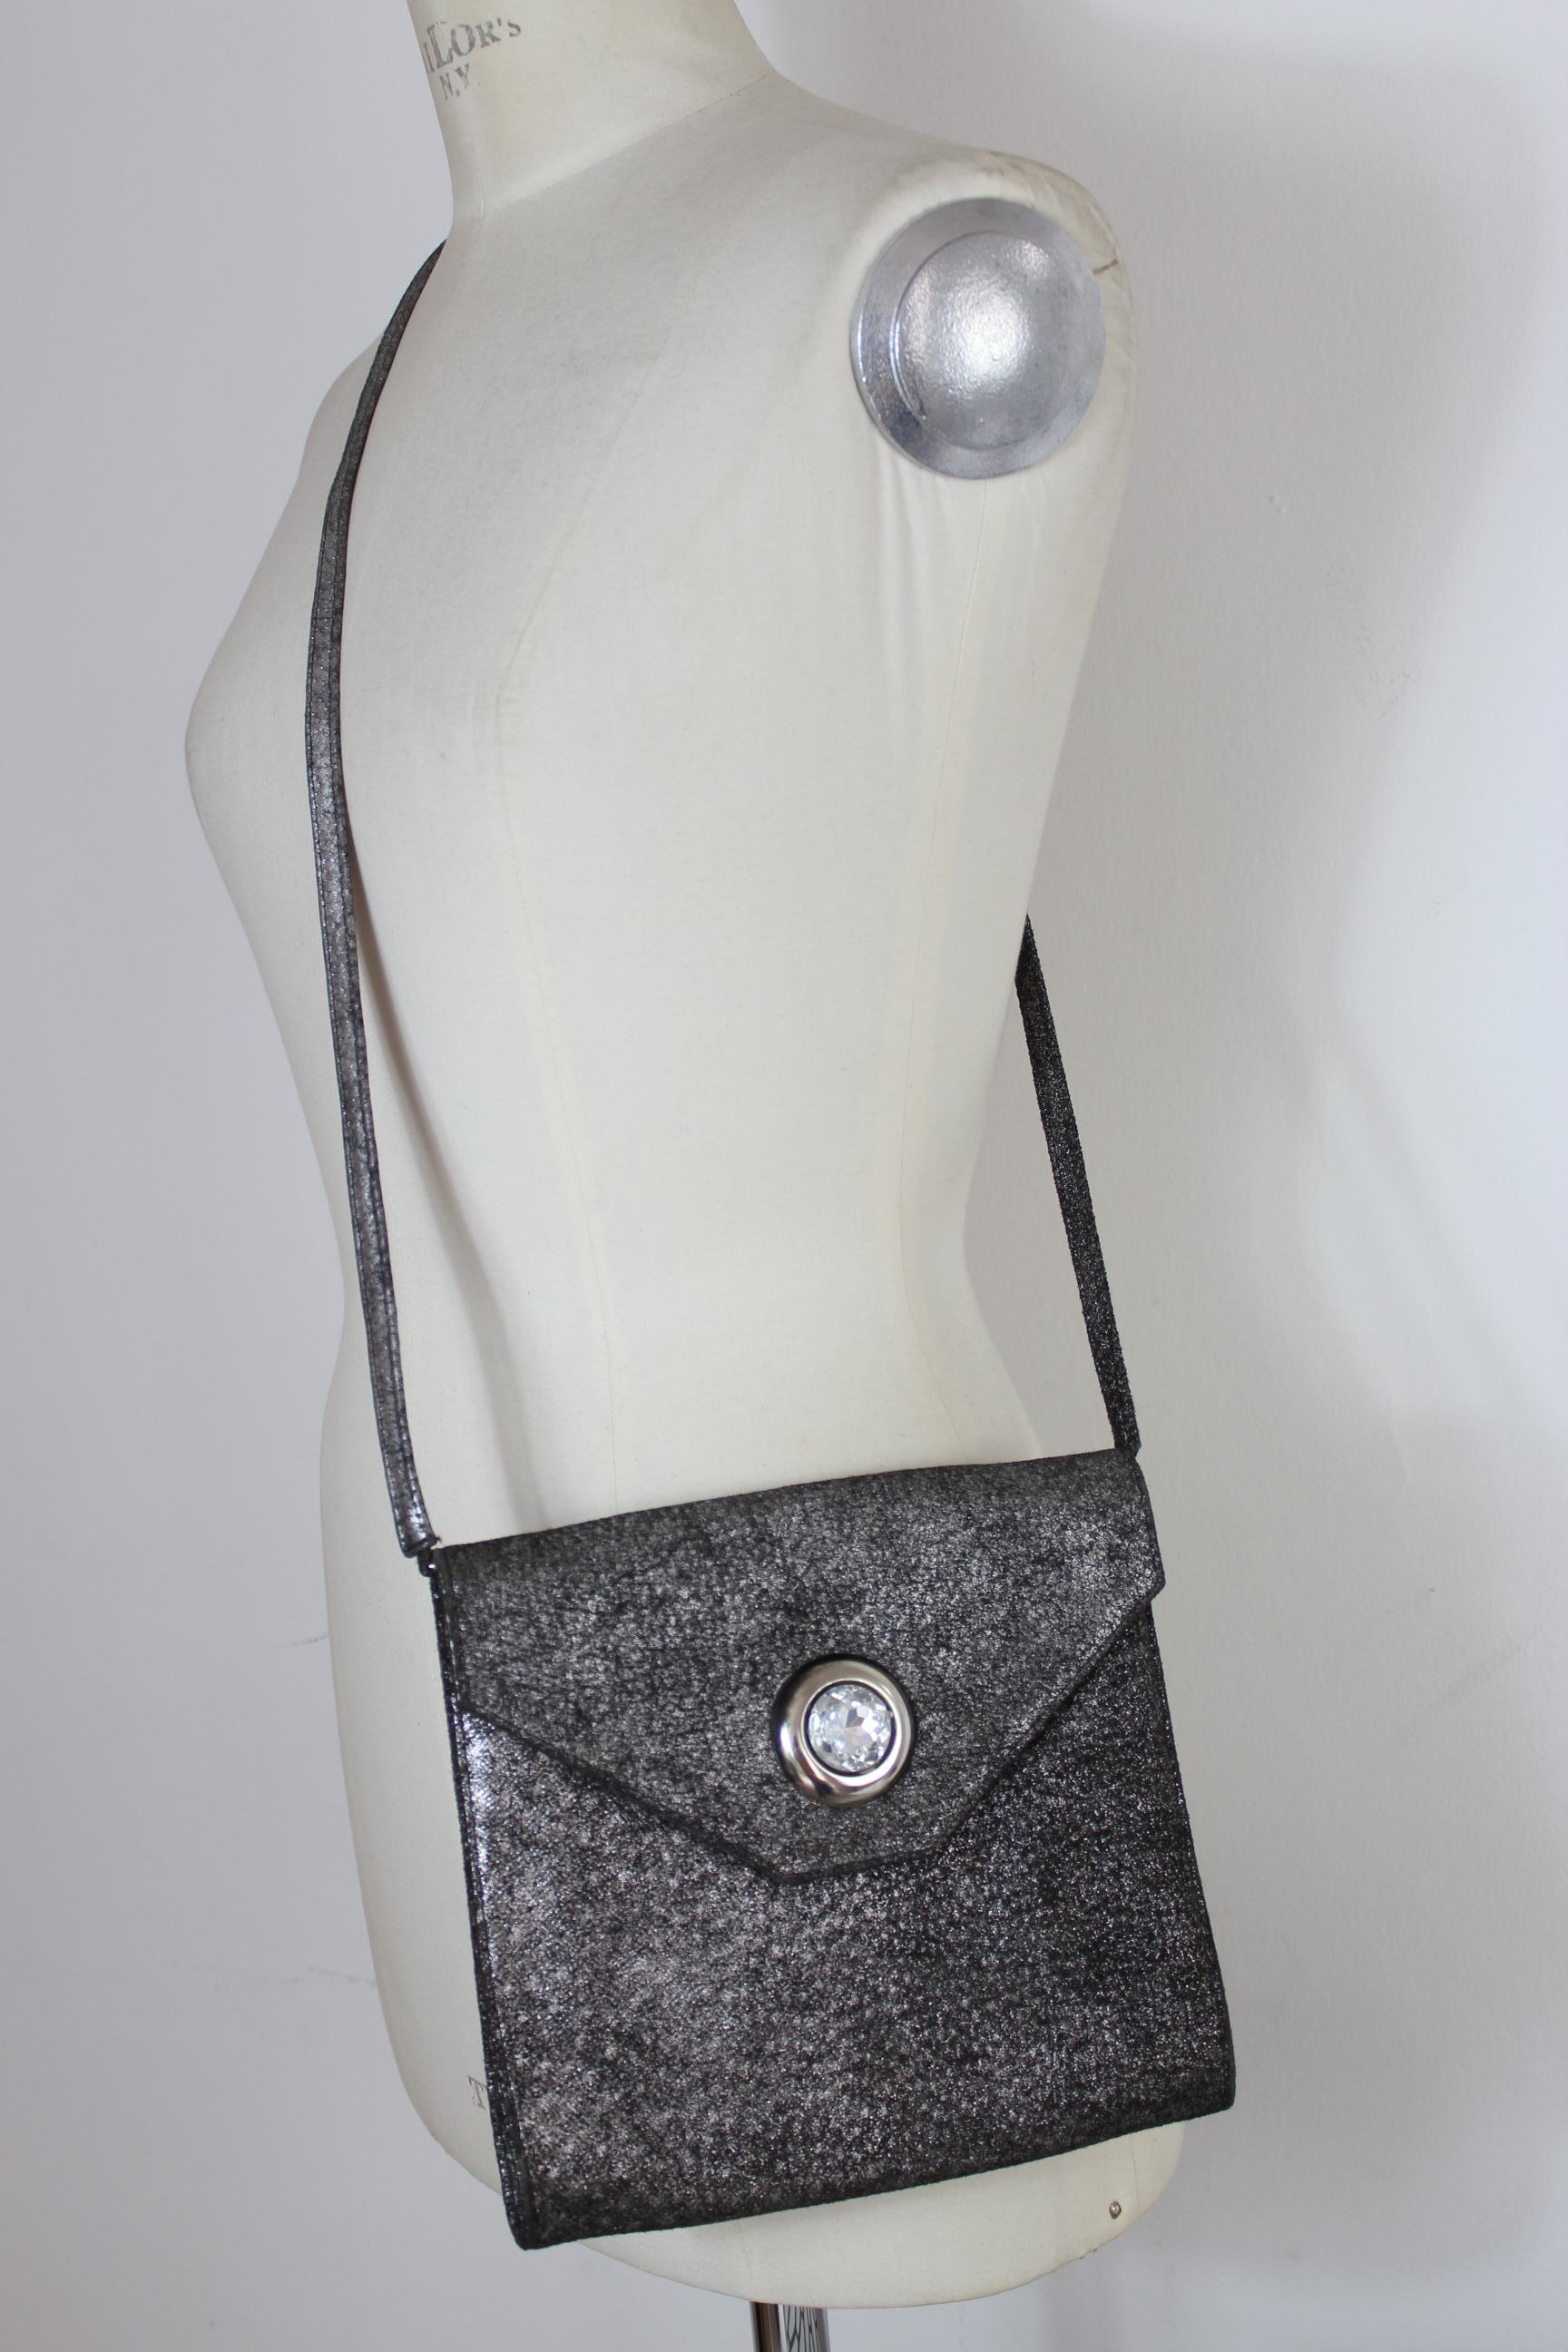 Krizia vintage 80's shoulder bag. Small model with shoulder strap in leather color silver. Closure with jewel button, internal dividers. Made in Italy. Excellent vintage condition.

Height: 22 cm 
Width: 20 cm 
Depth: 3 cm